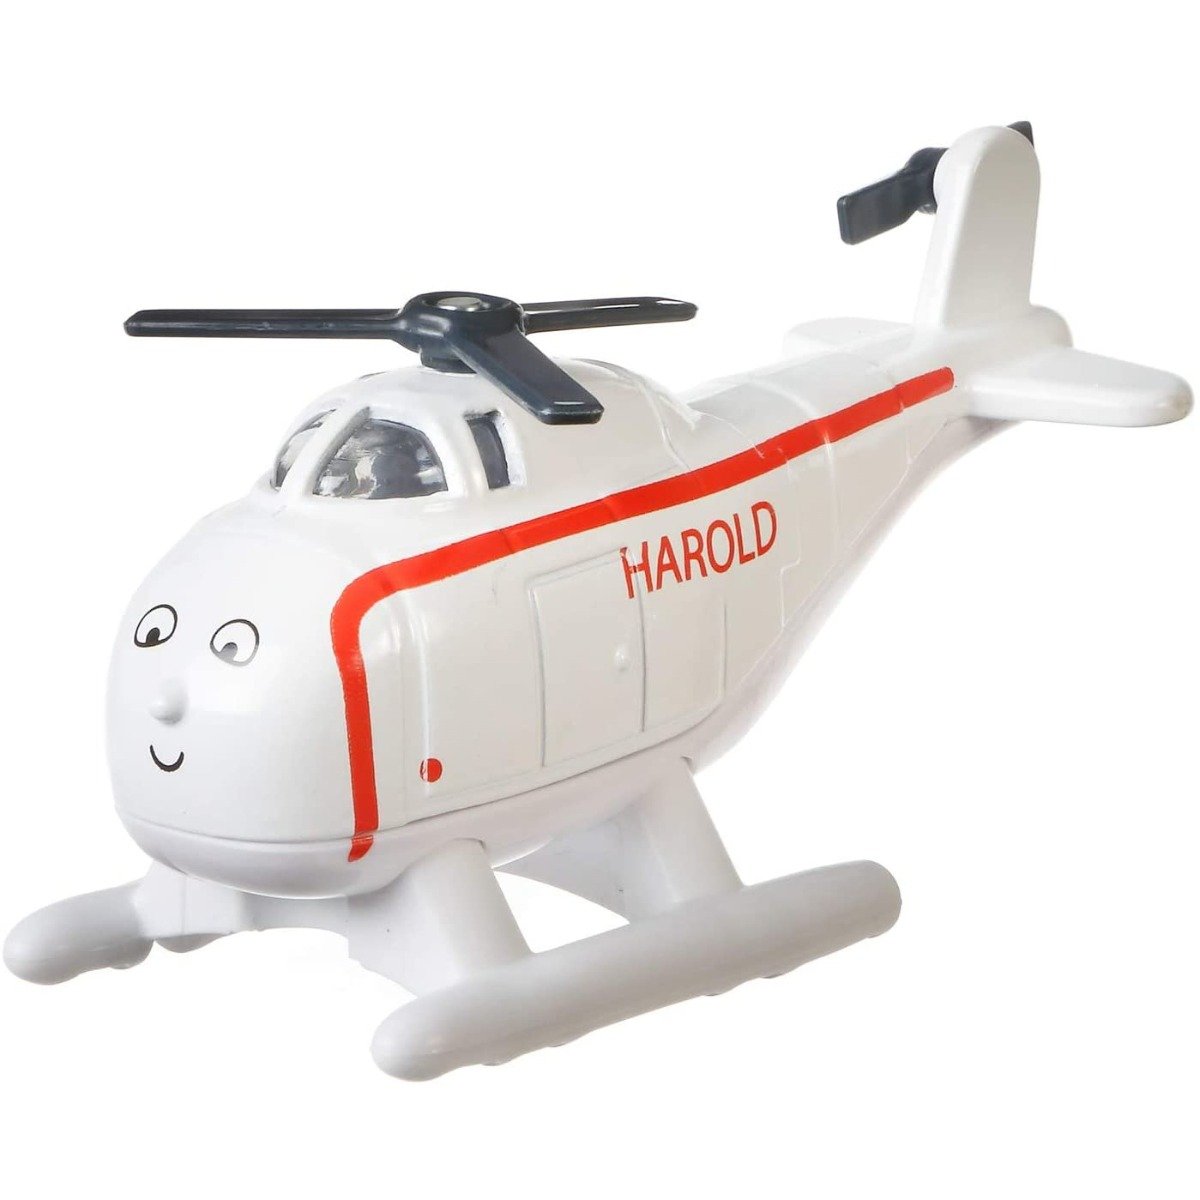 Elicopter metalic Thomas and Friends, Harold FXX04